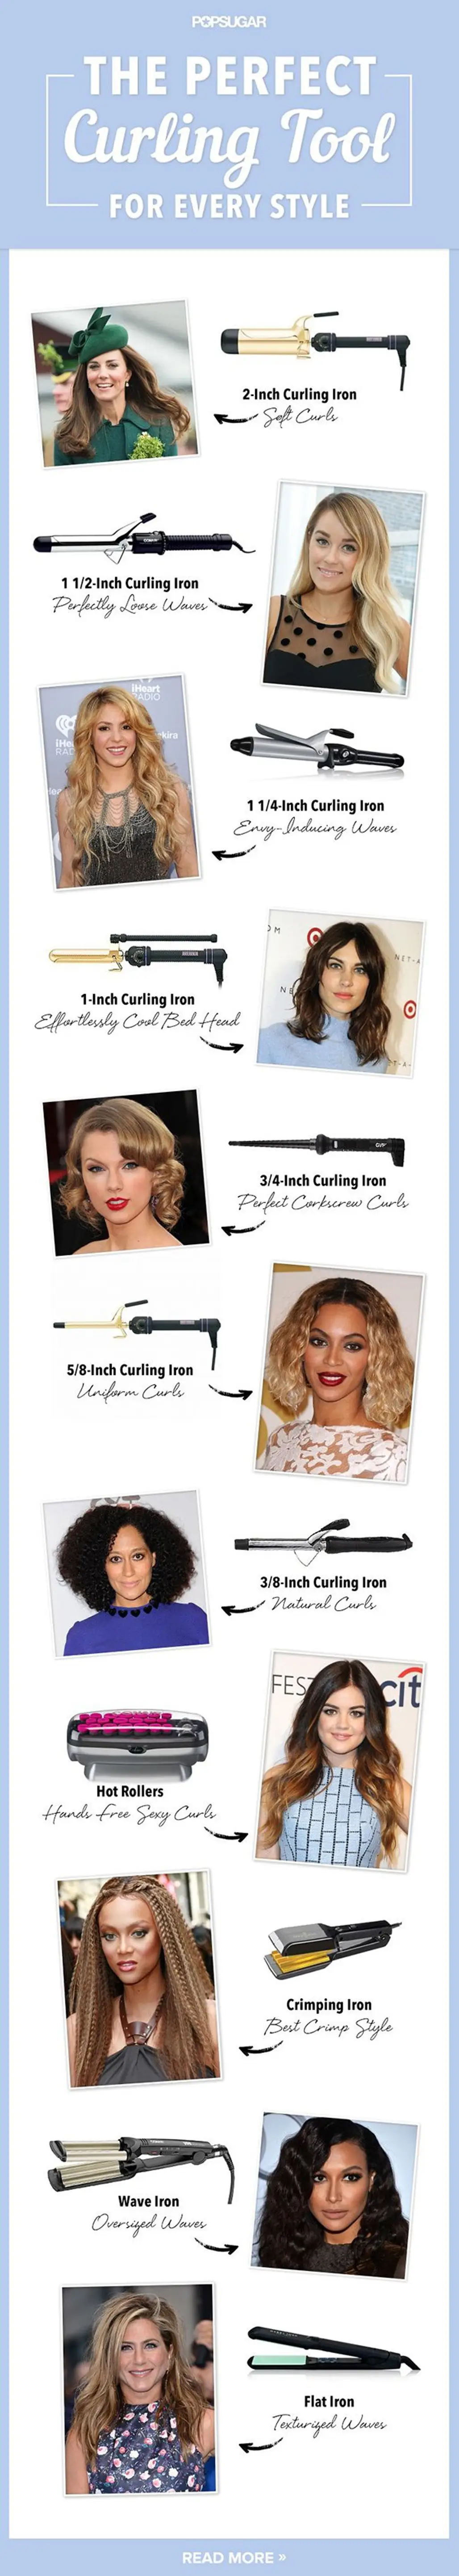 How to Get Your Fave Celebrity Waves